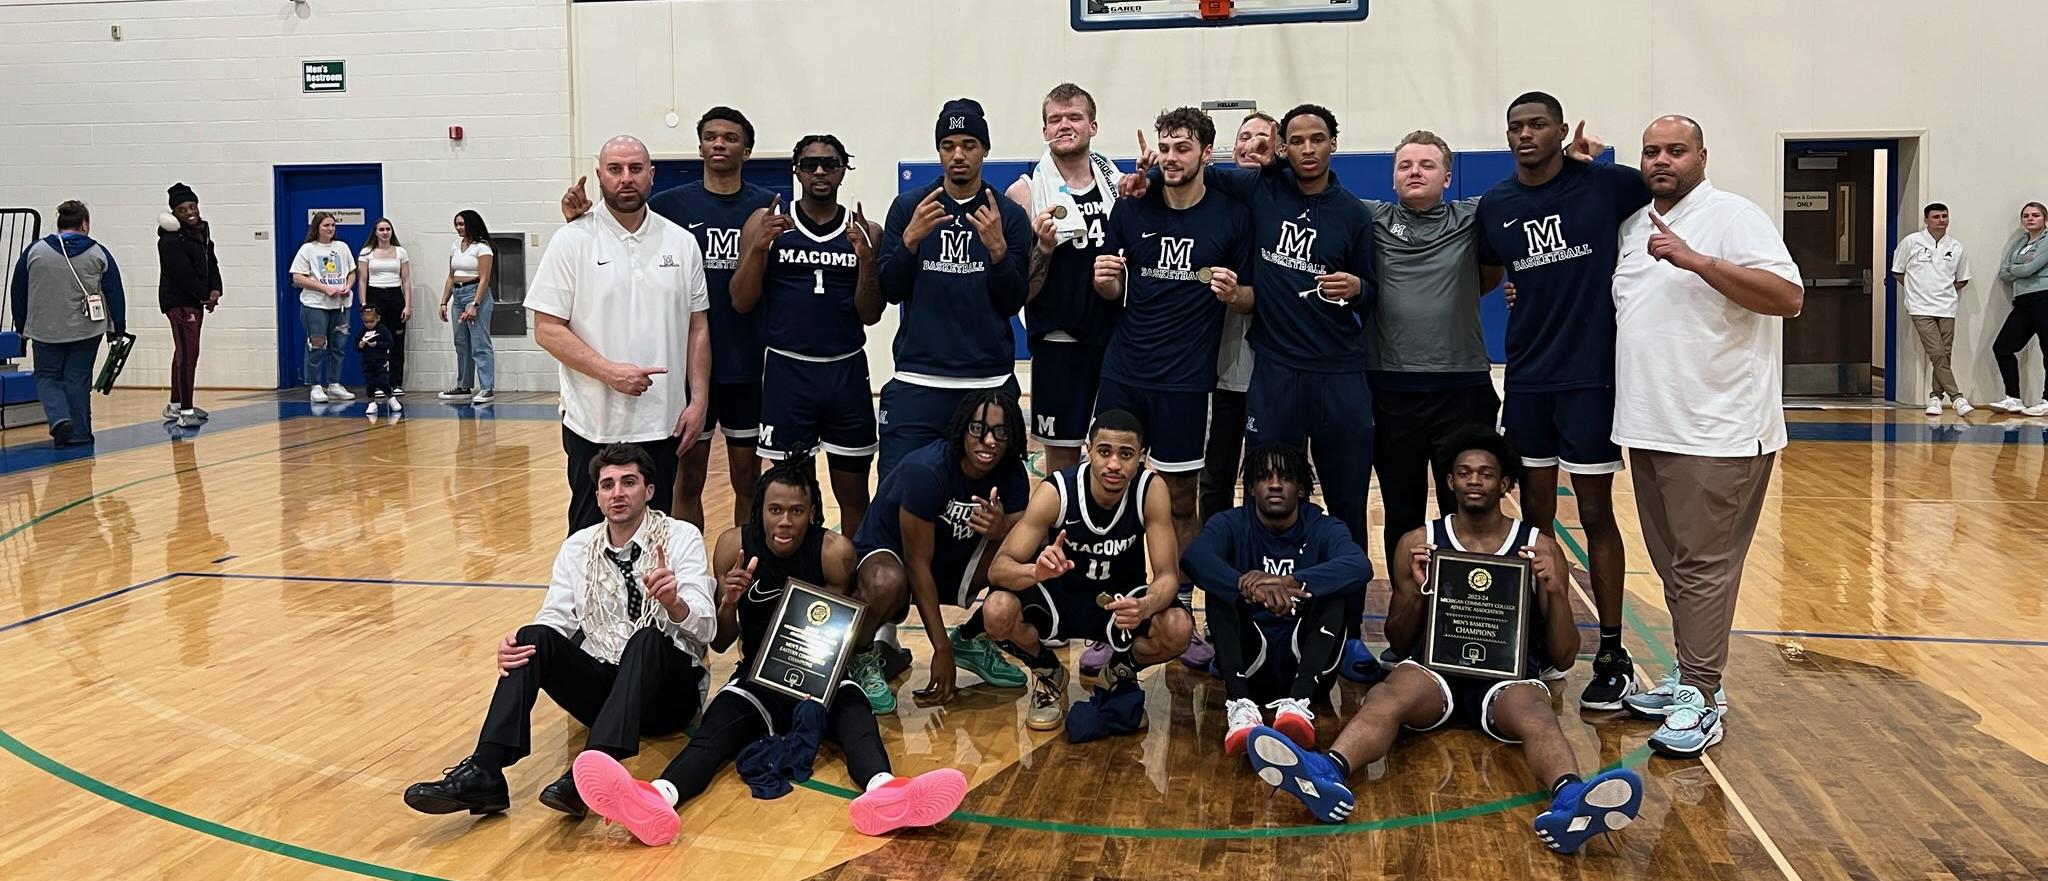 Macomb Captures Second MCCAA Men's Basketball Crown in Program History Over Bay College